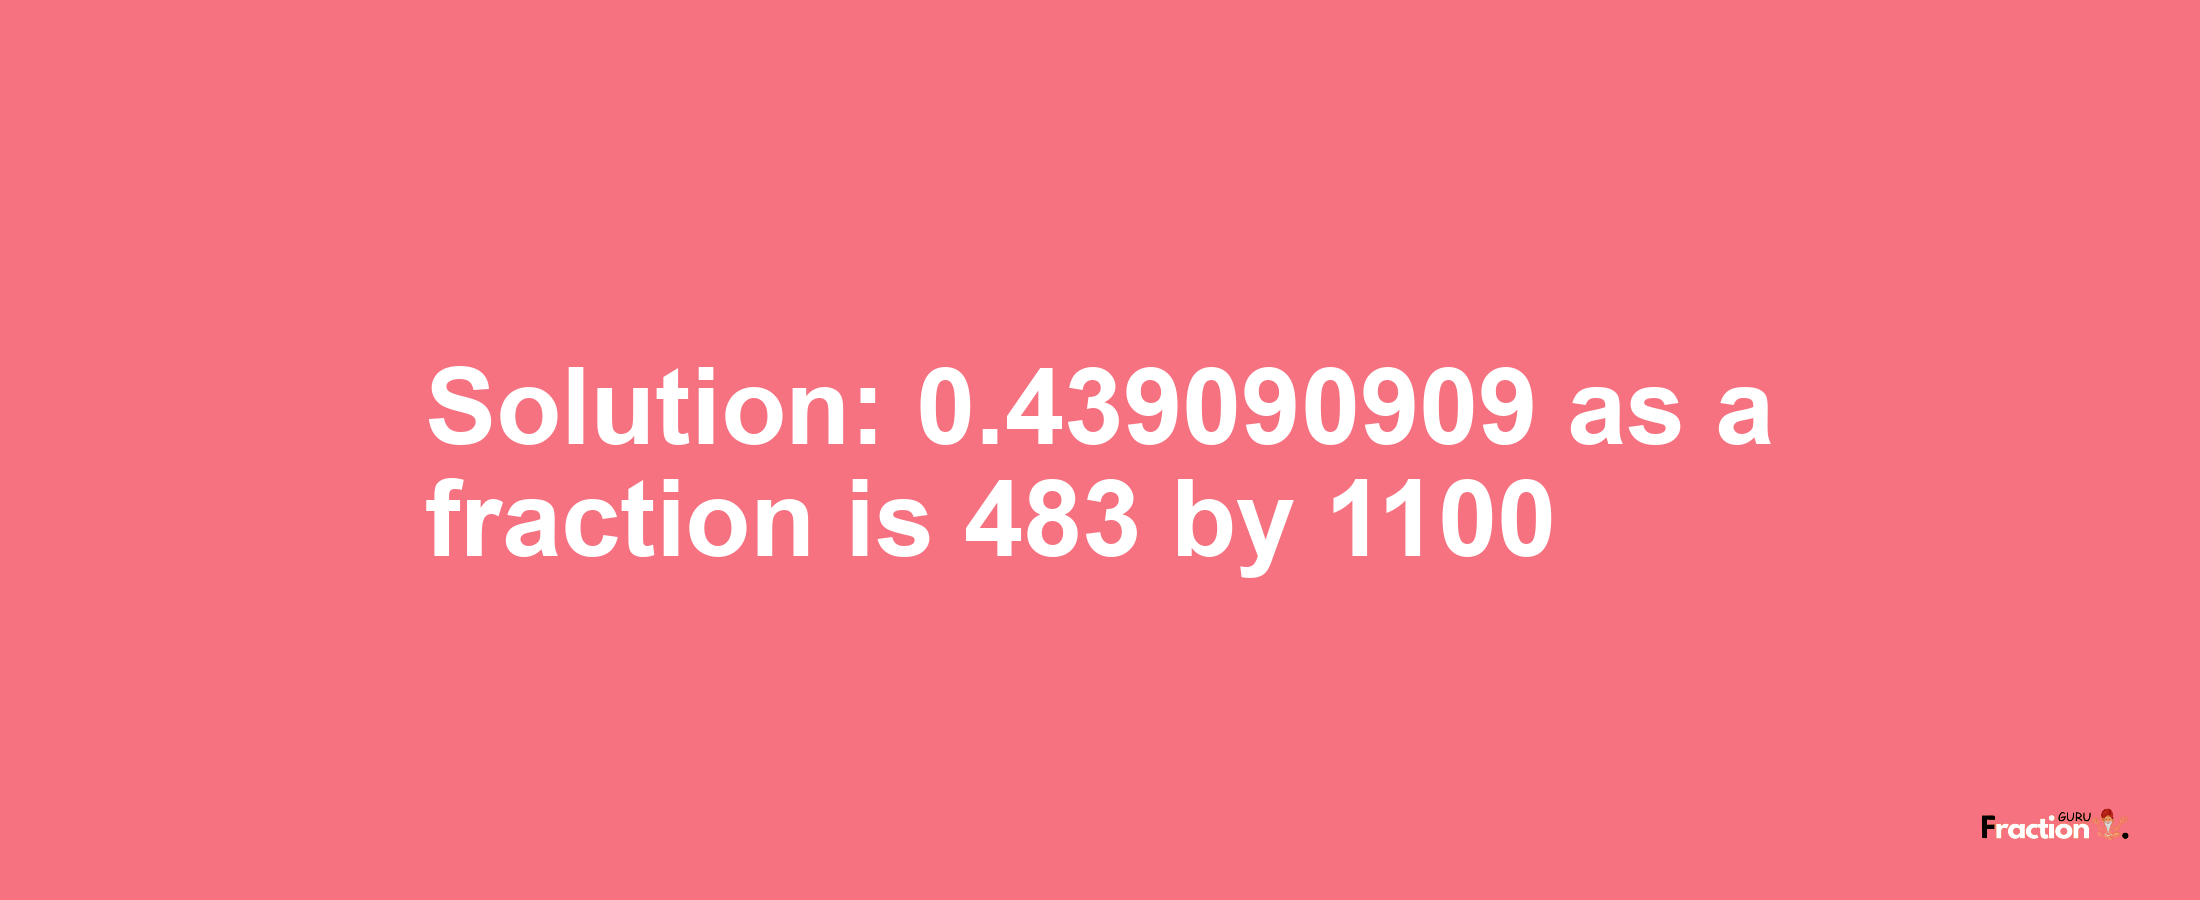 Solution:0.439090909 as a fraction is 483/1100